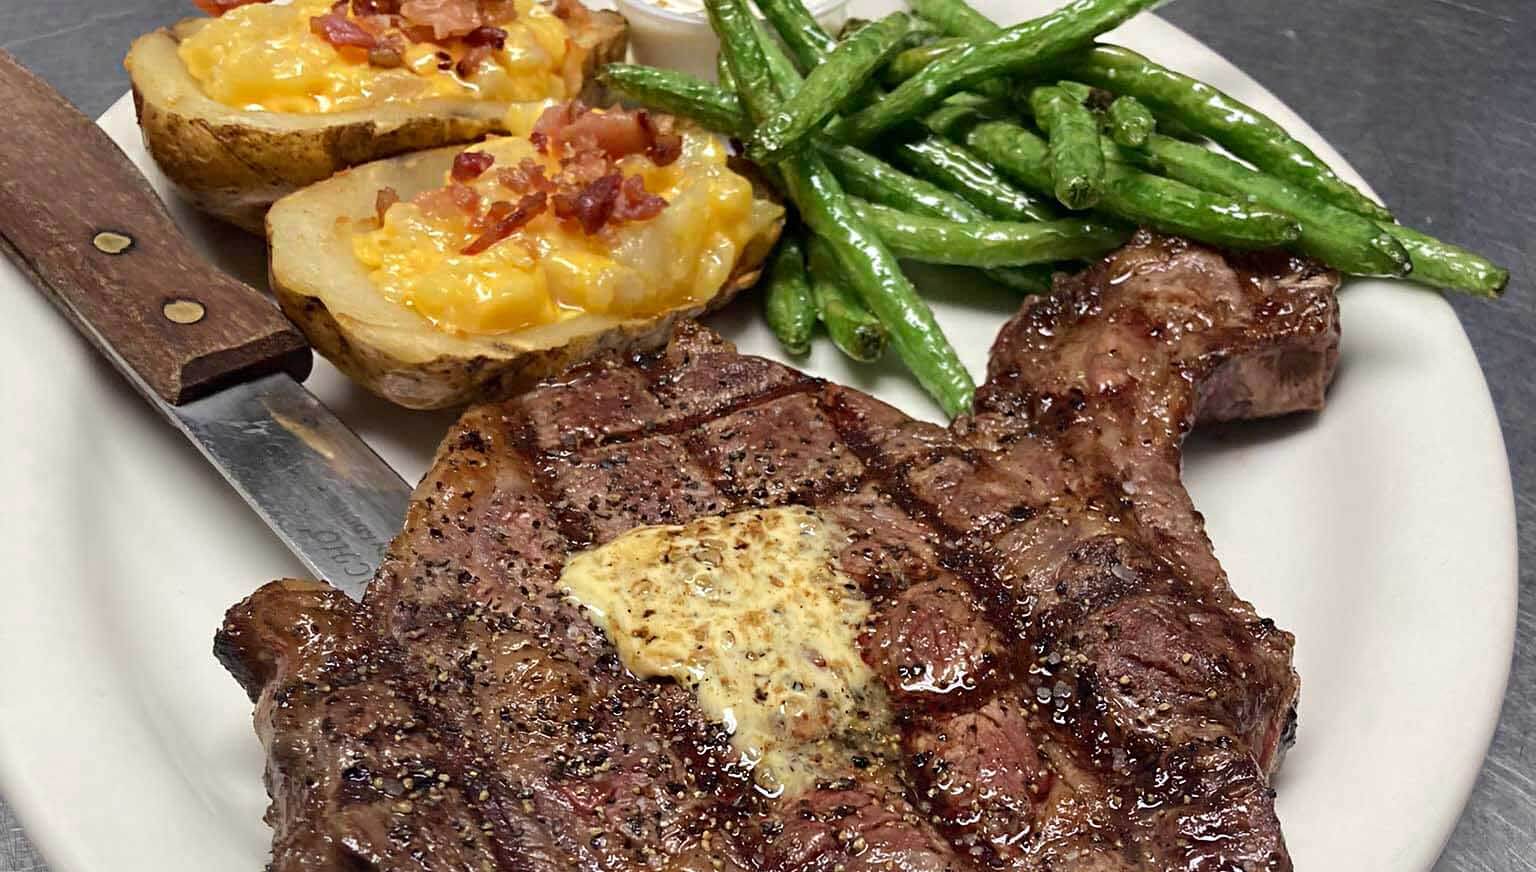 steak, twice baked potatoes, and green beans